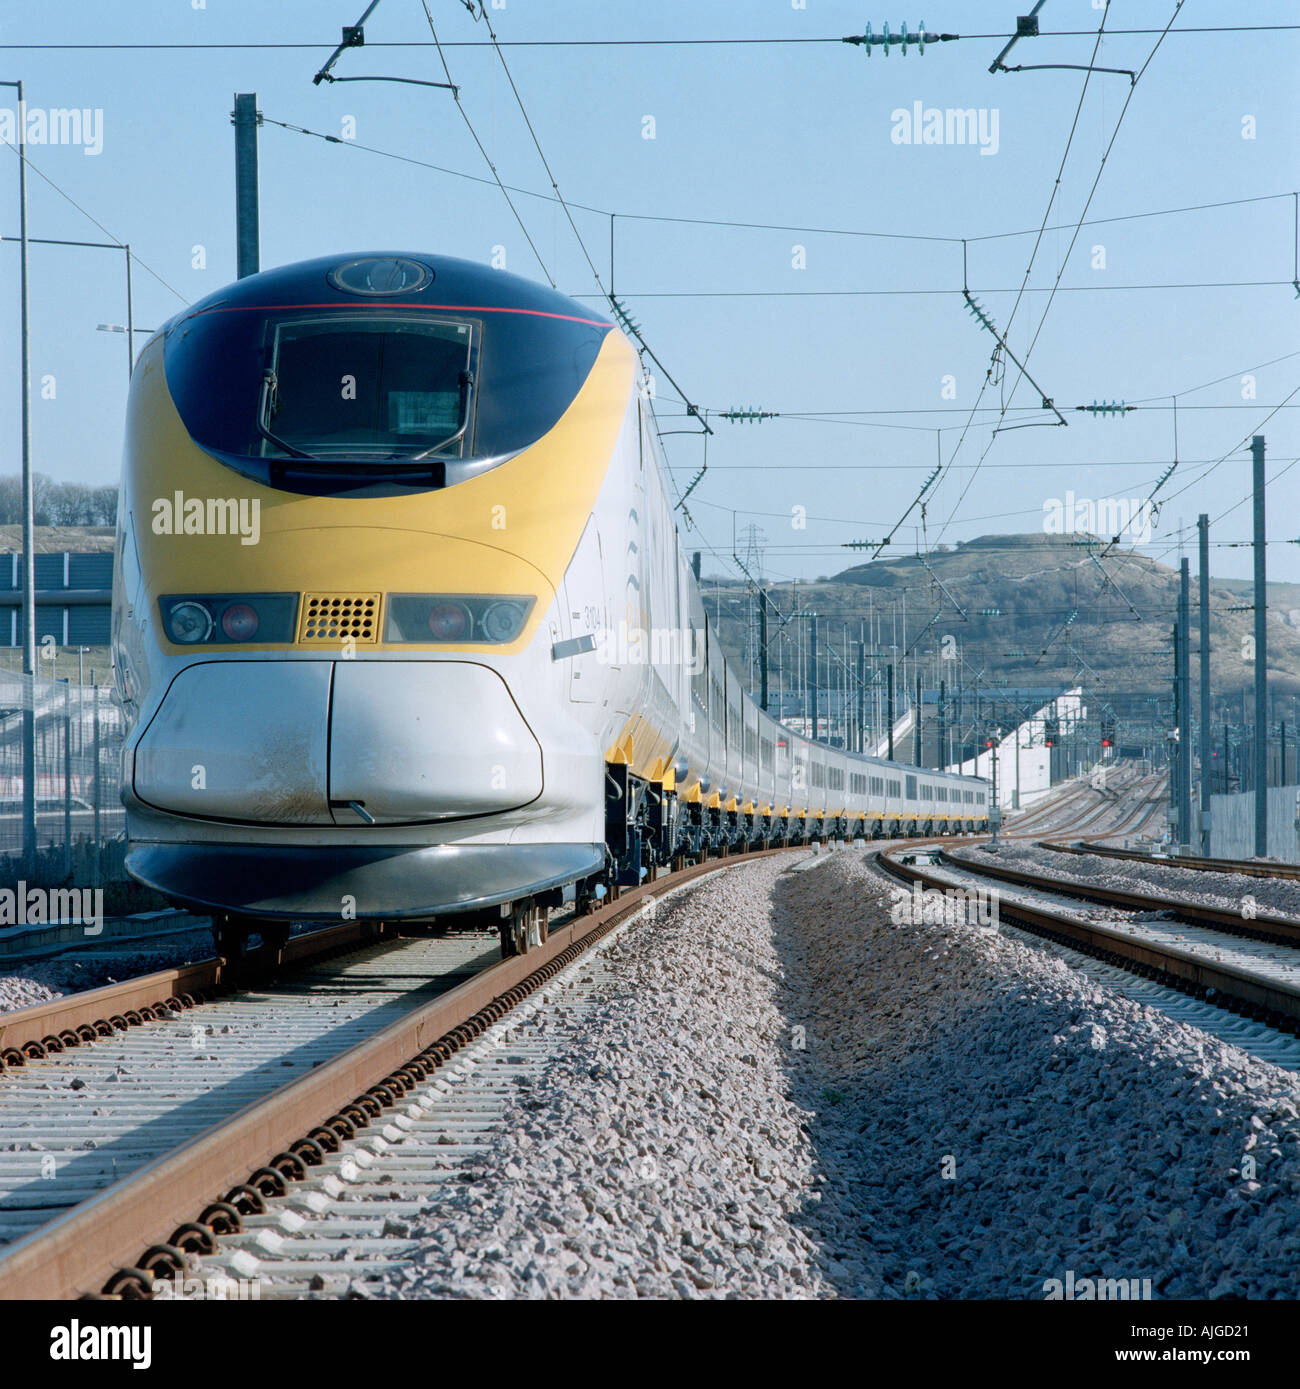 The 300km/h (186mph) Eurostar high-speed train on the Continental Main Line at the Eurotunnel UK Terminal at Folkestone. Stock Photo